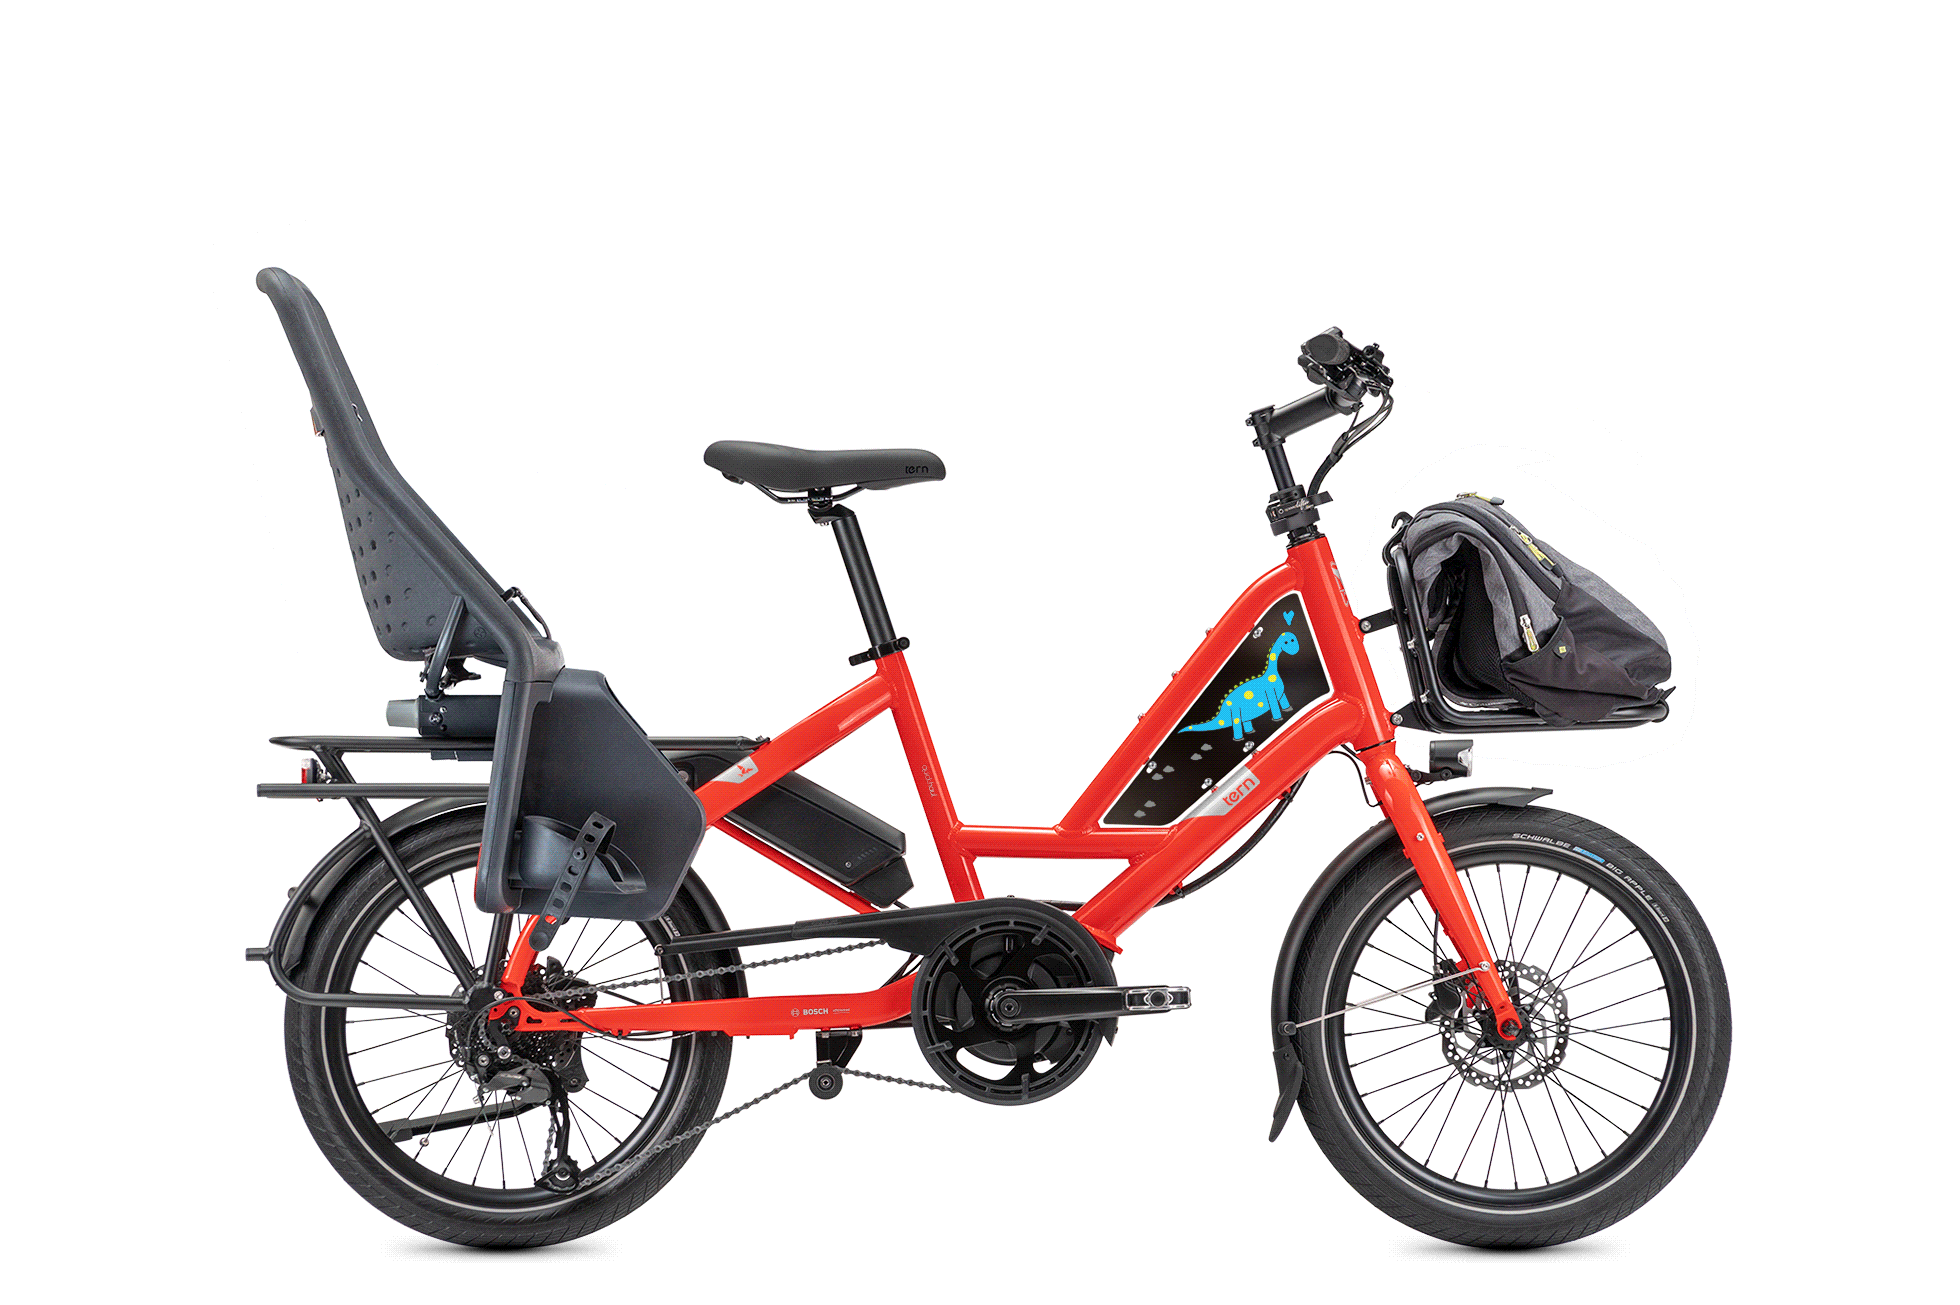 VELOS CYCLO CARGO - OUTILLAGE PLOMBERIE - PETITS STOCKS PLOMBERIE